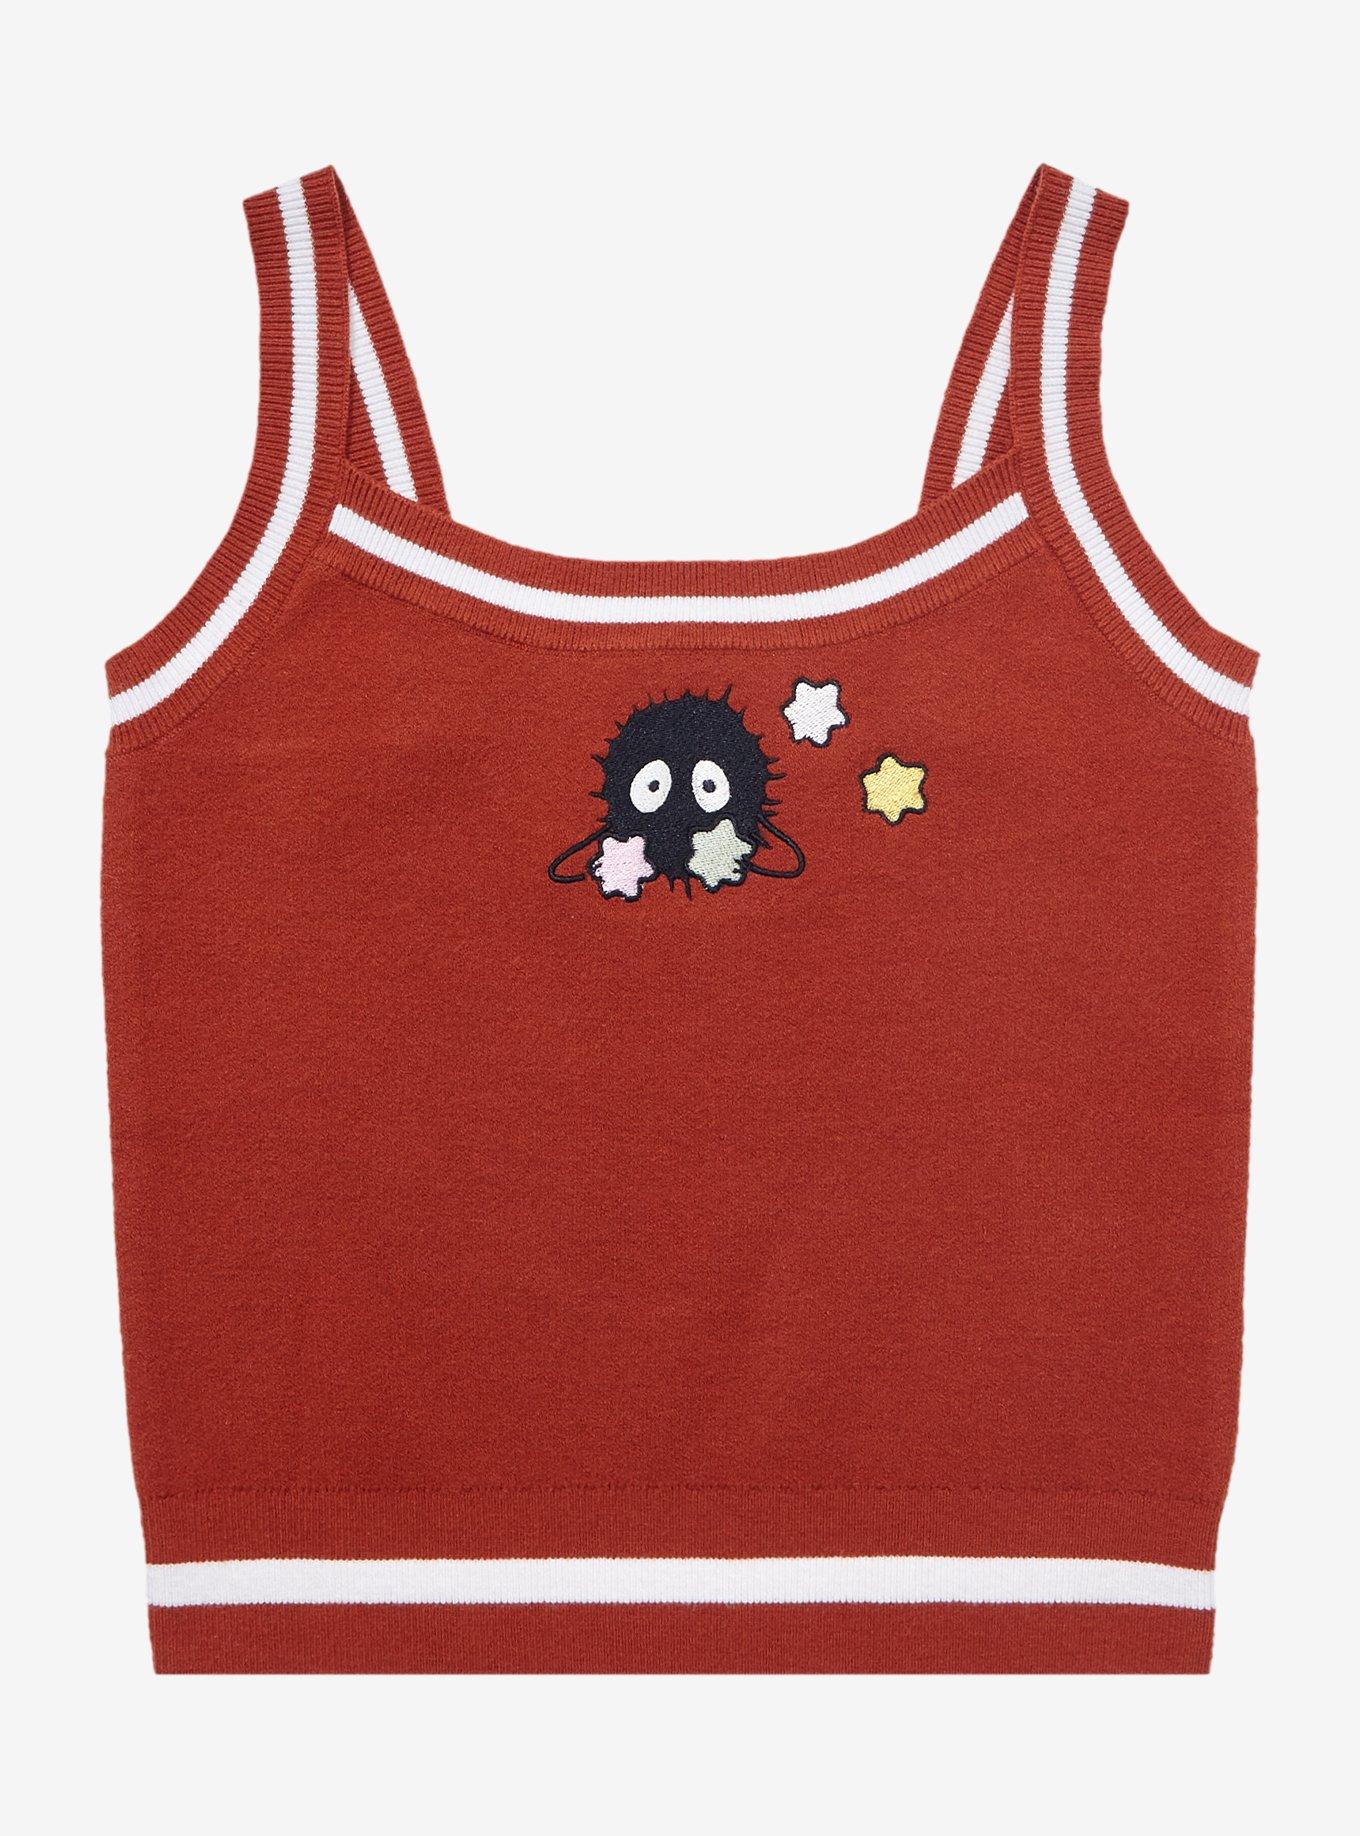 Studio Ghibli Spirited Away Soot Sprite Women's Knit Tank - BoxLunch Exclusive, RED, hi-res